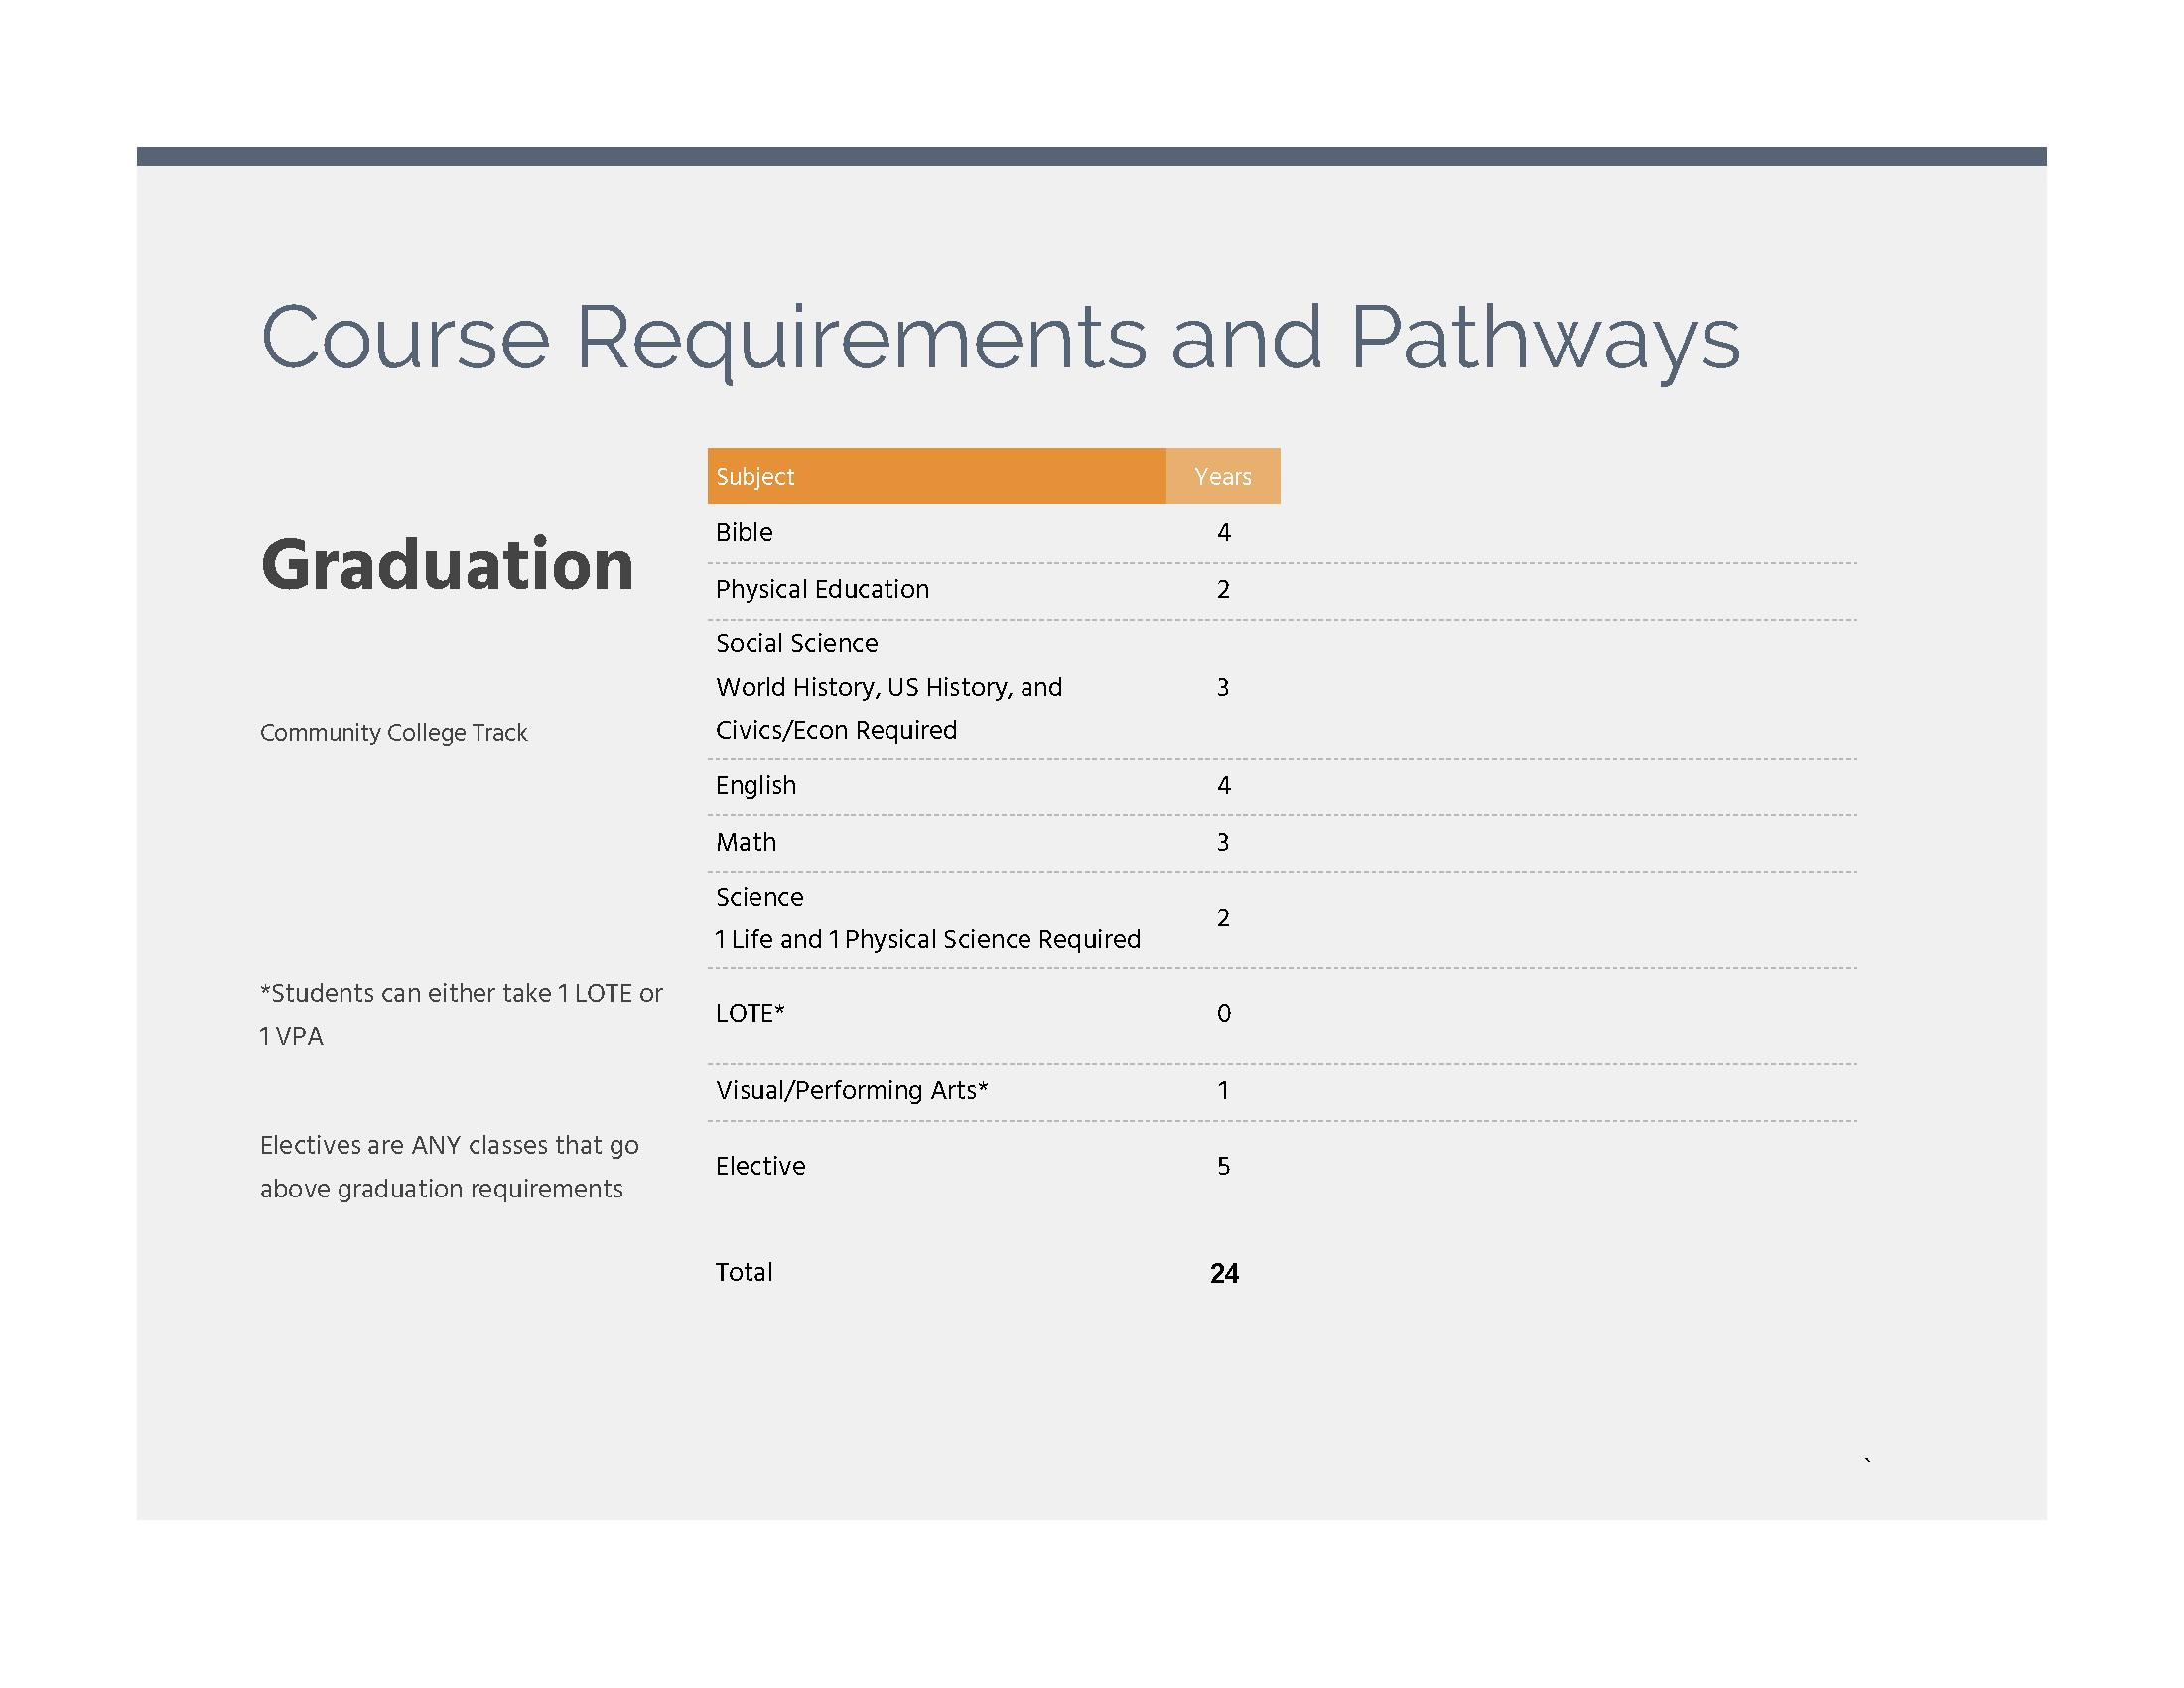 Course Requirements and Pathways image 1